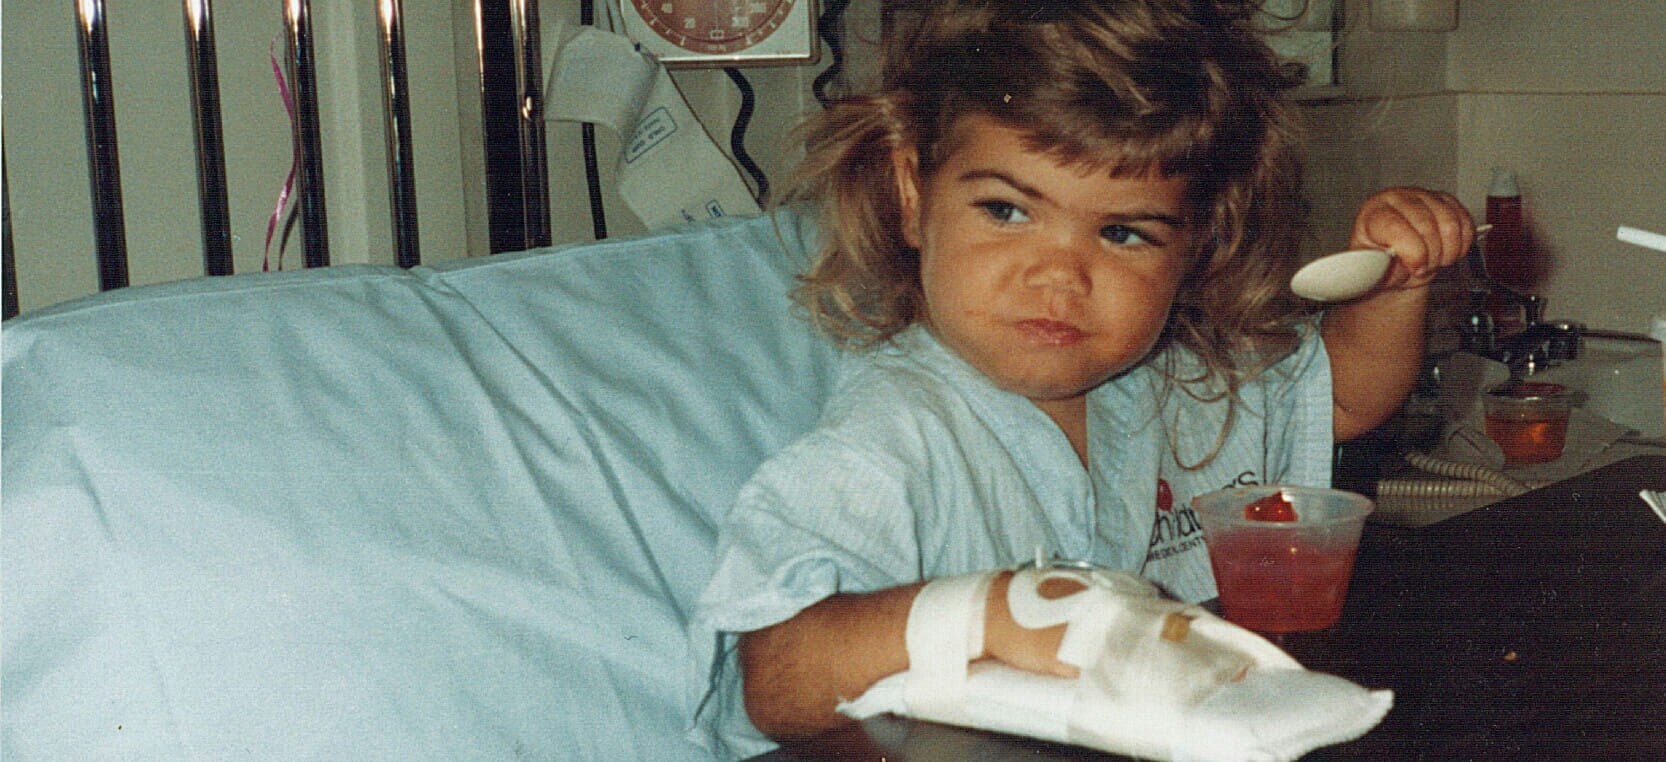 Kendra Plumley in a hospital bed, shortly after getting a heart transplant at 21 months old.